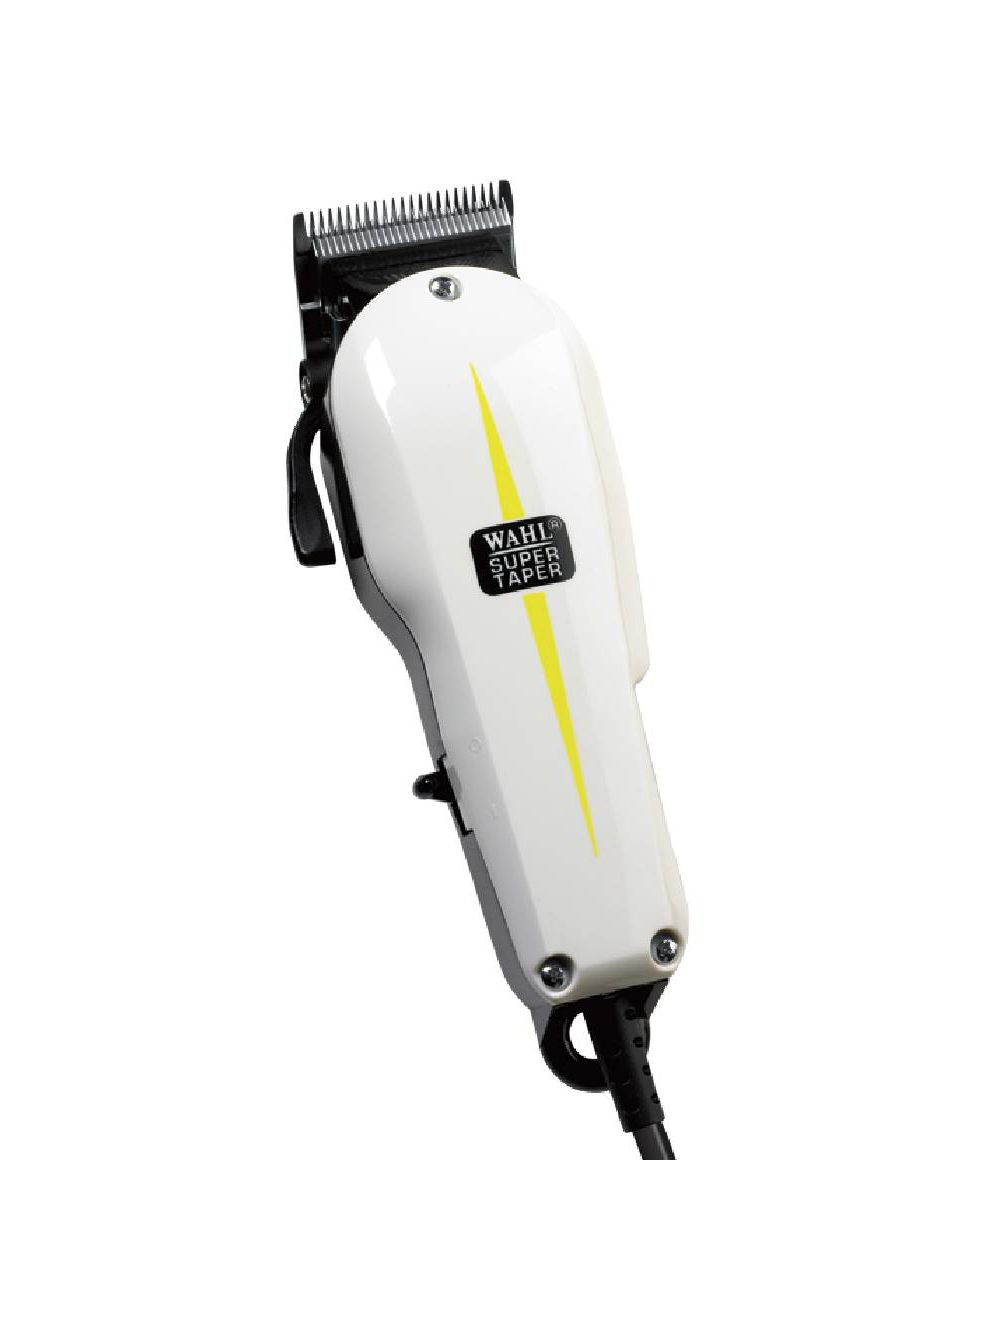 WAHL PROFESSIONAL HAIR CLIPPER | Radian Online